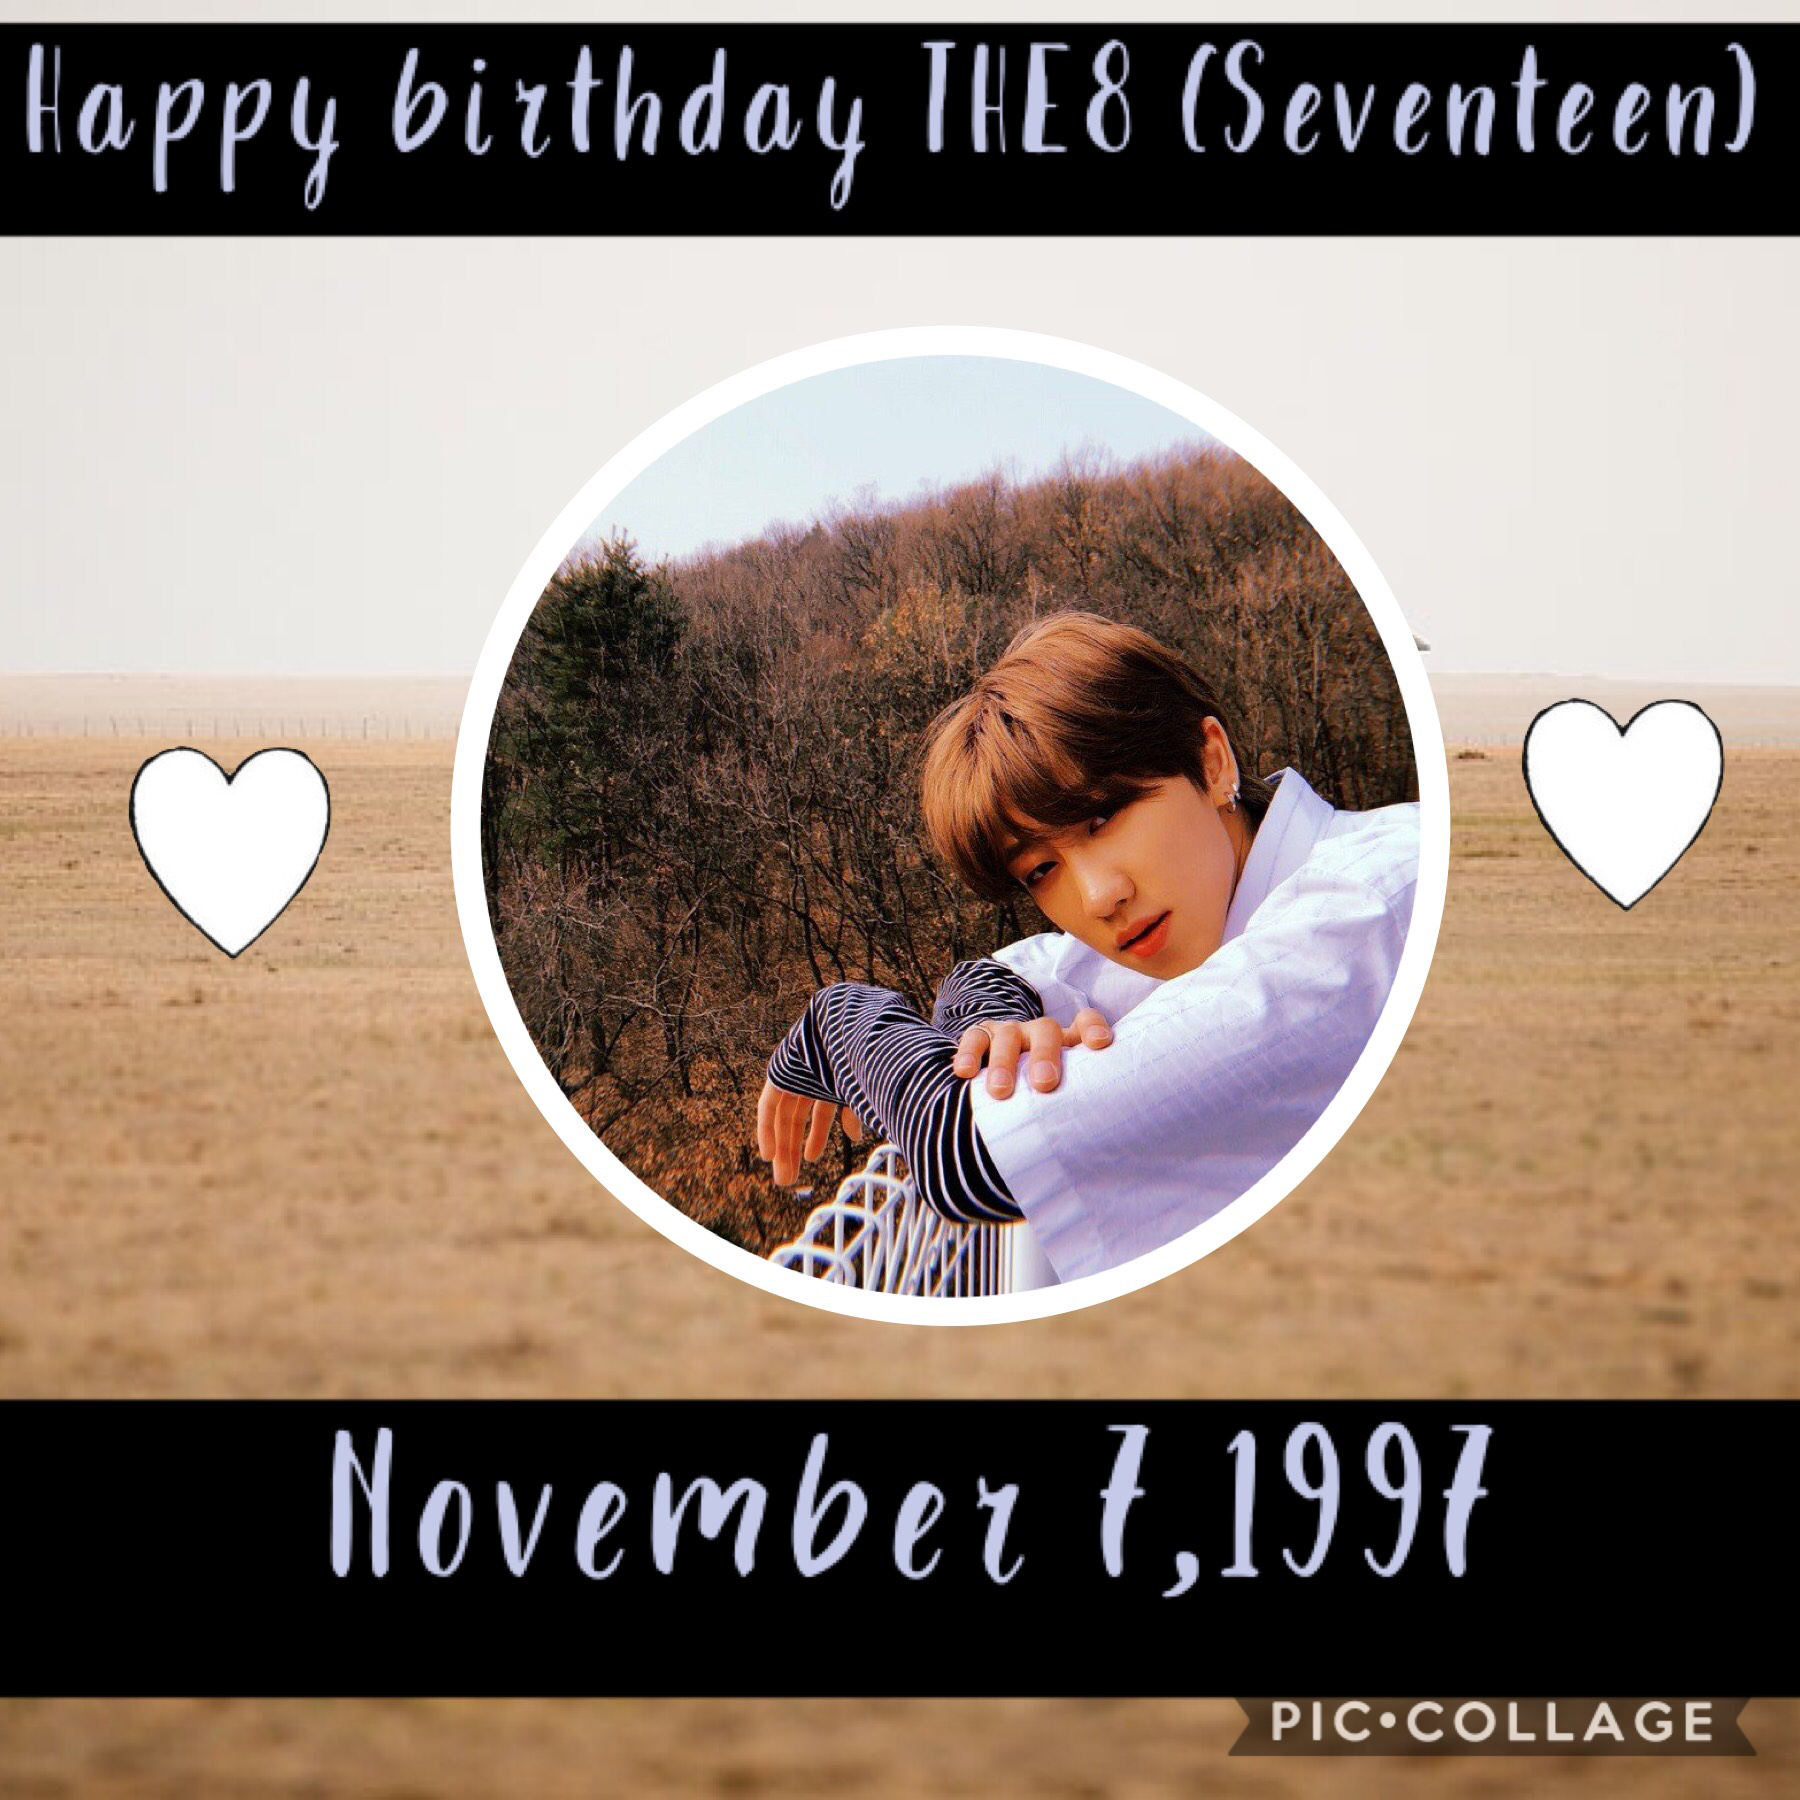 •Xu Minghao•
Happy birthday!!💝💝 he’s such a talented dancer and he deserves more lines~ his vocals are so unique:)
It’s amazing to see how much Seventeen has grown up wowowow
~Whoop